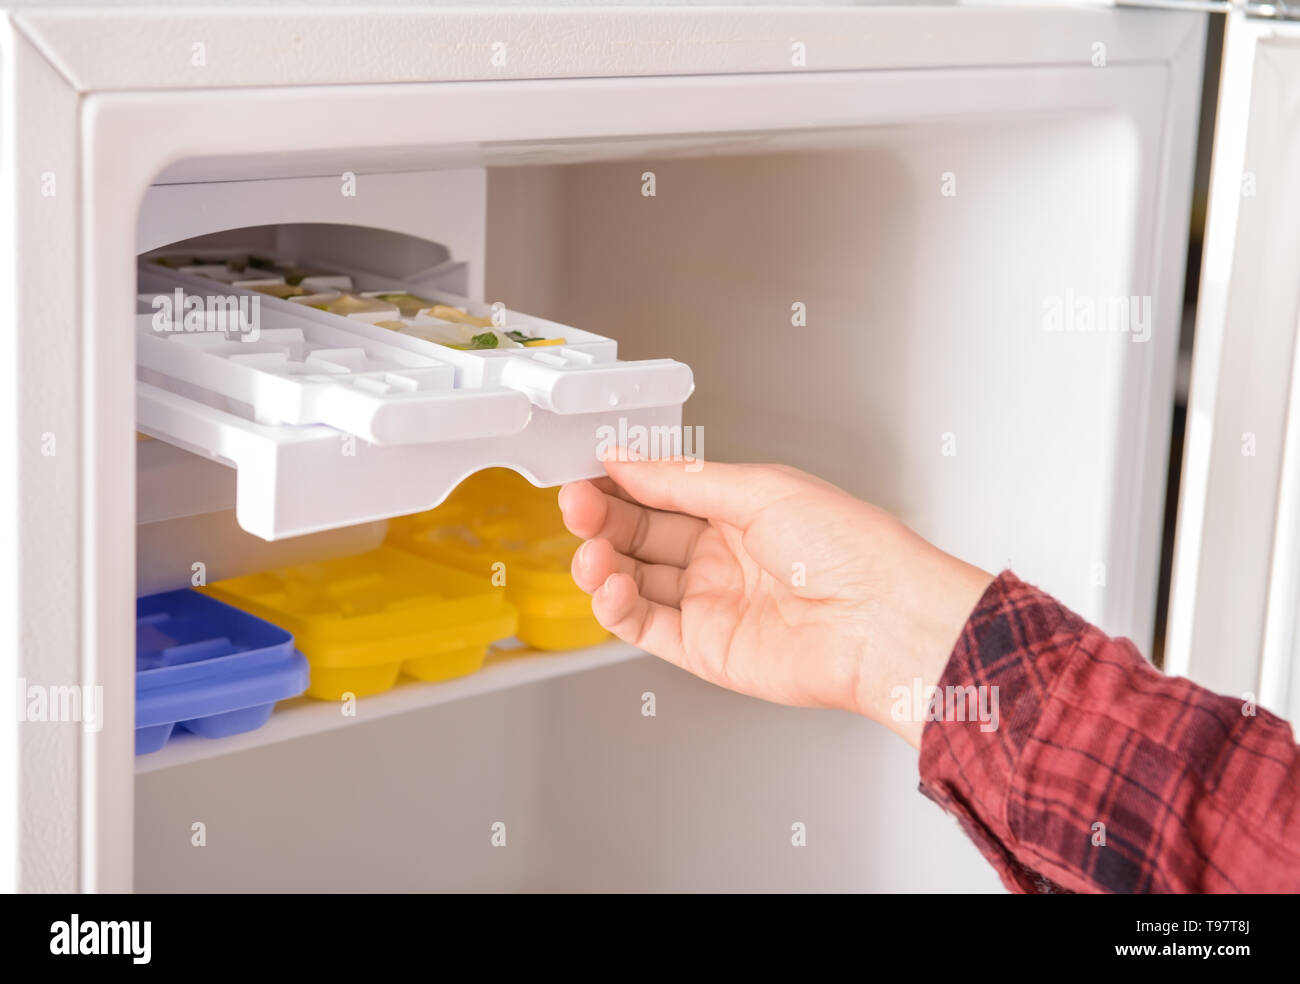 https://c8.alamy.com/comp/T97T8J/woman-putting-tray-with-citrus-fruits-frozen-in-ice-cubes-into-refrigerator-T97T8J.jpg